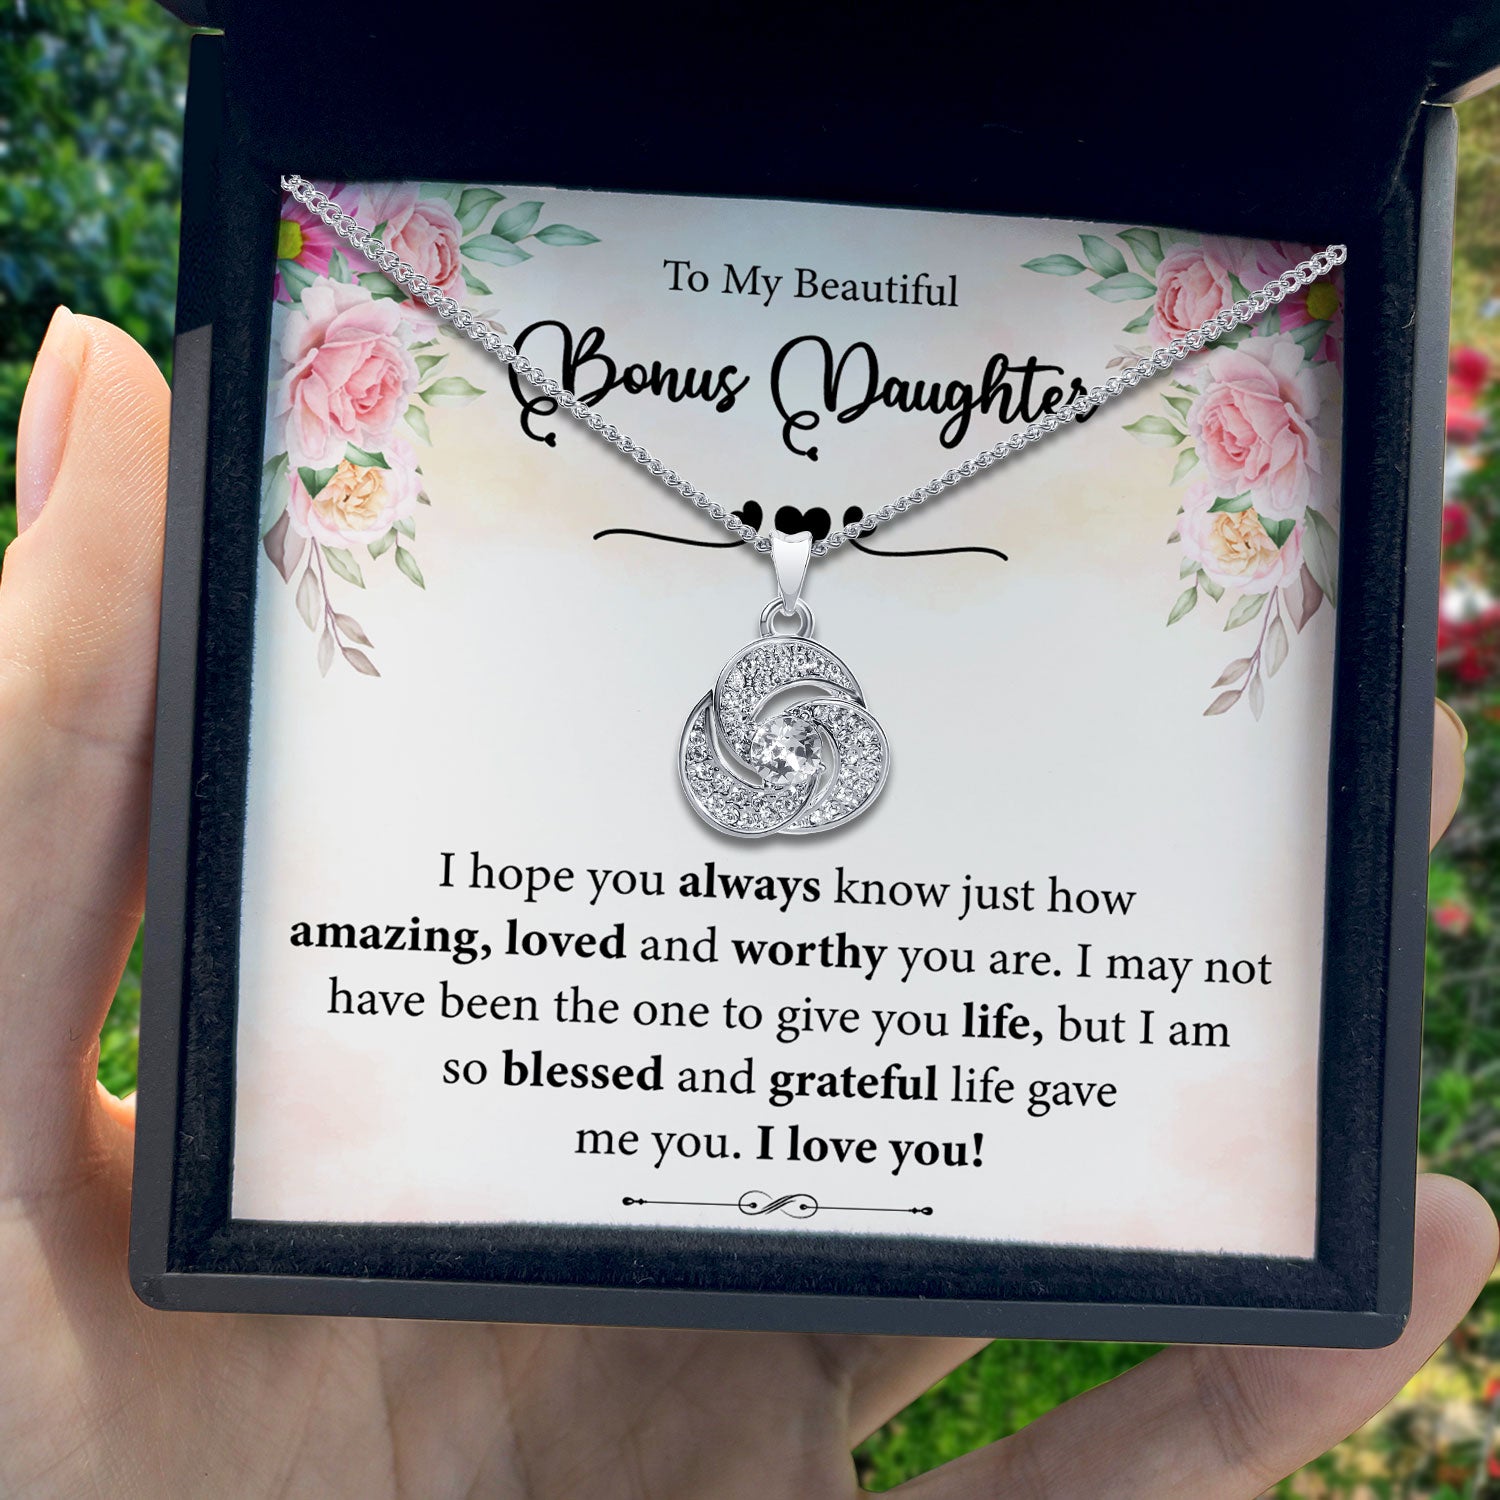 To My Beautiful Bonus Daughter - I Love You! - Tryndi Love Knot Necklace